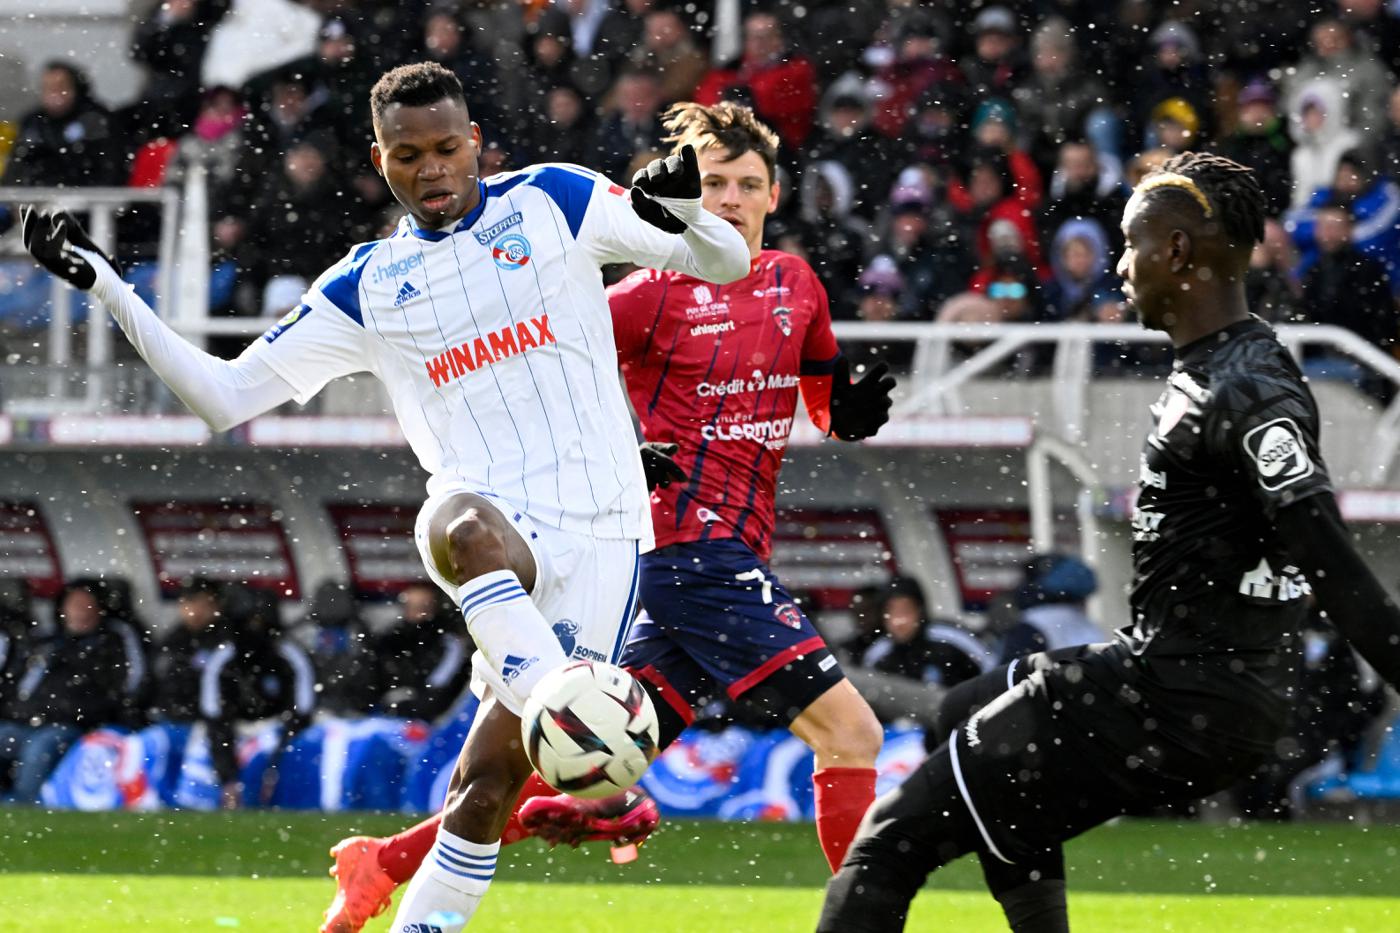 Clermont - Strasbourg - 1:1. French Premier League, 25th round. Match Review, Statistics